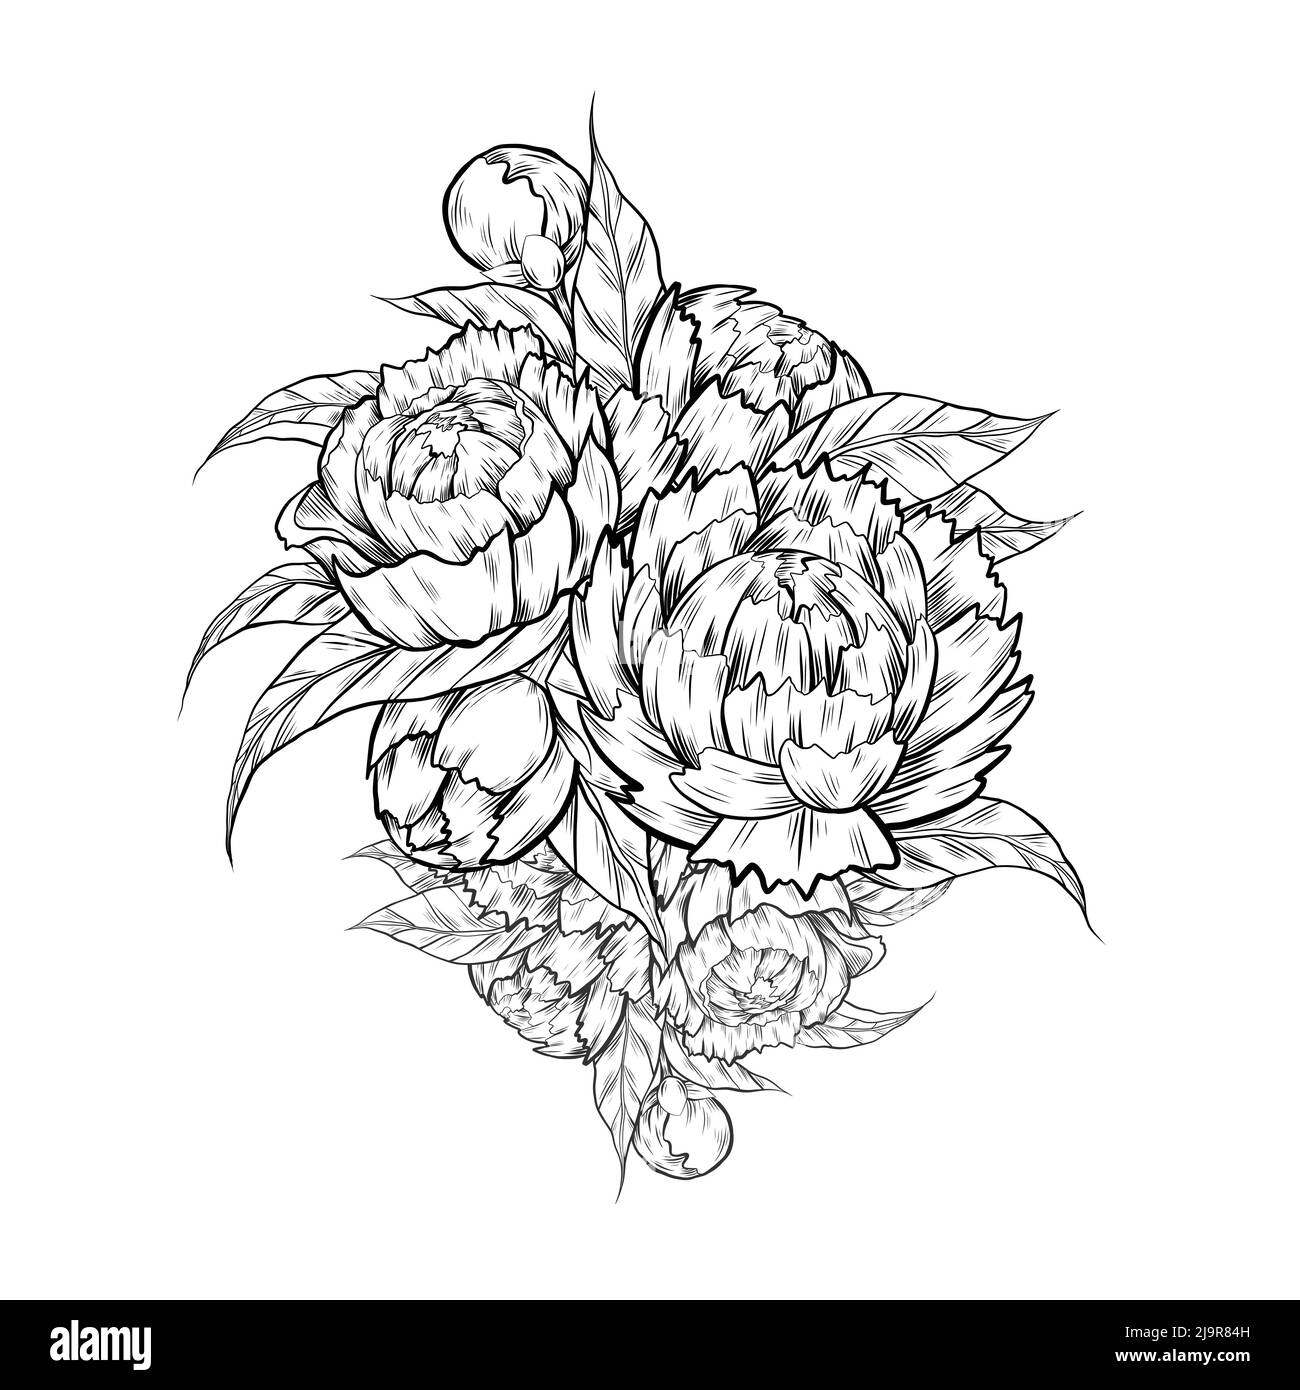 Peony clip art Black and White Stock Photos & Images - Alamy